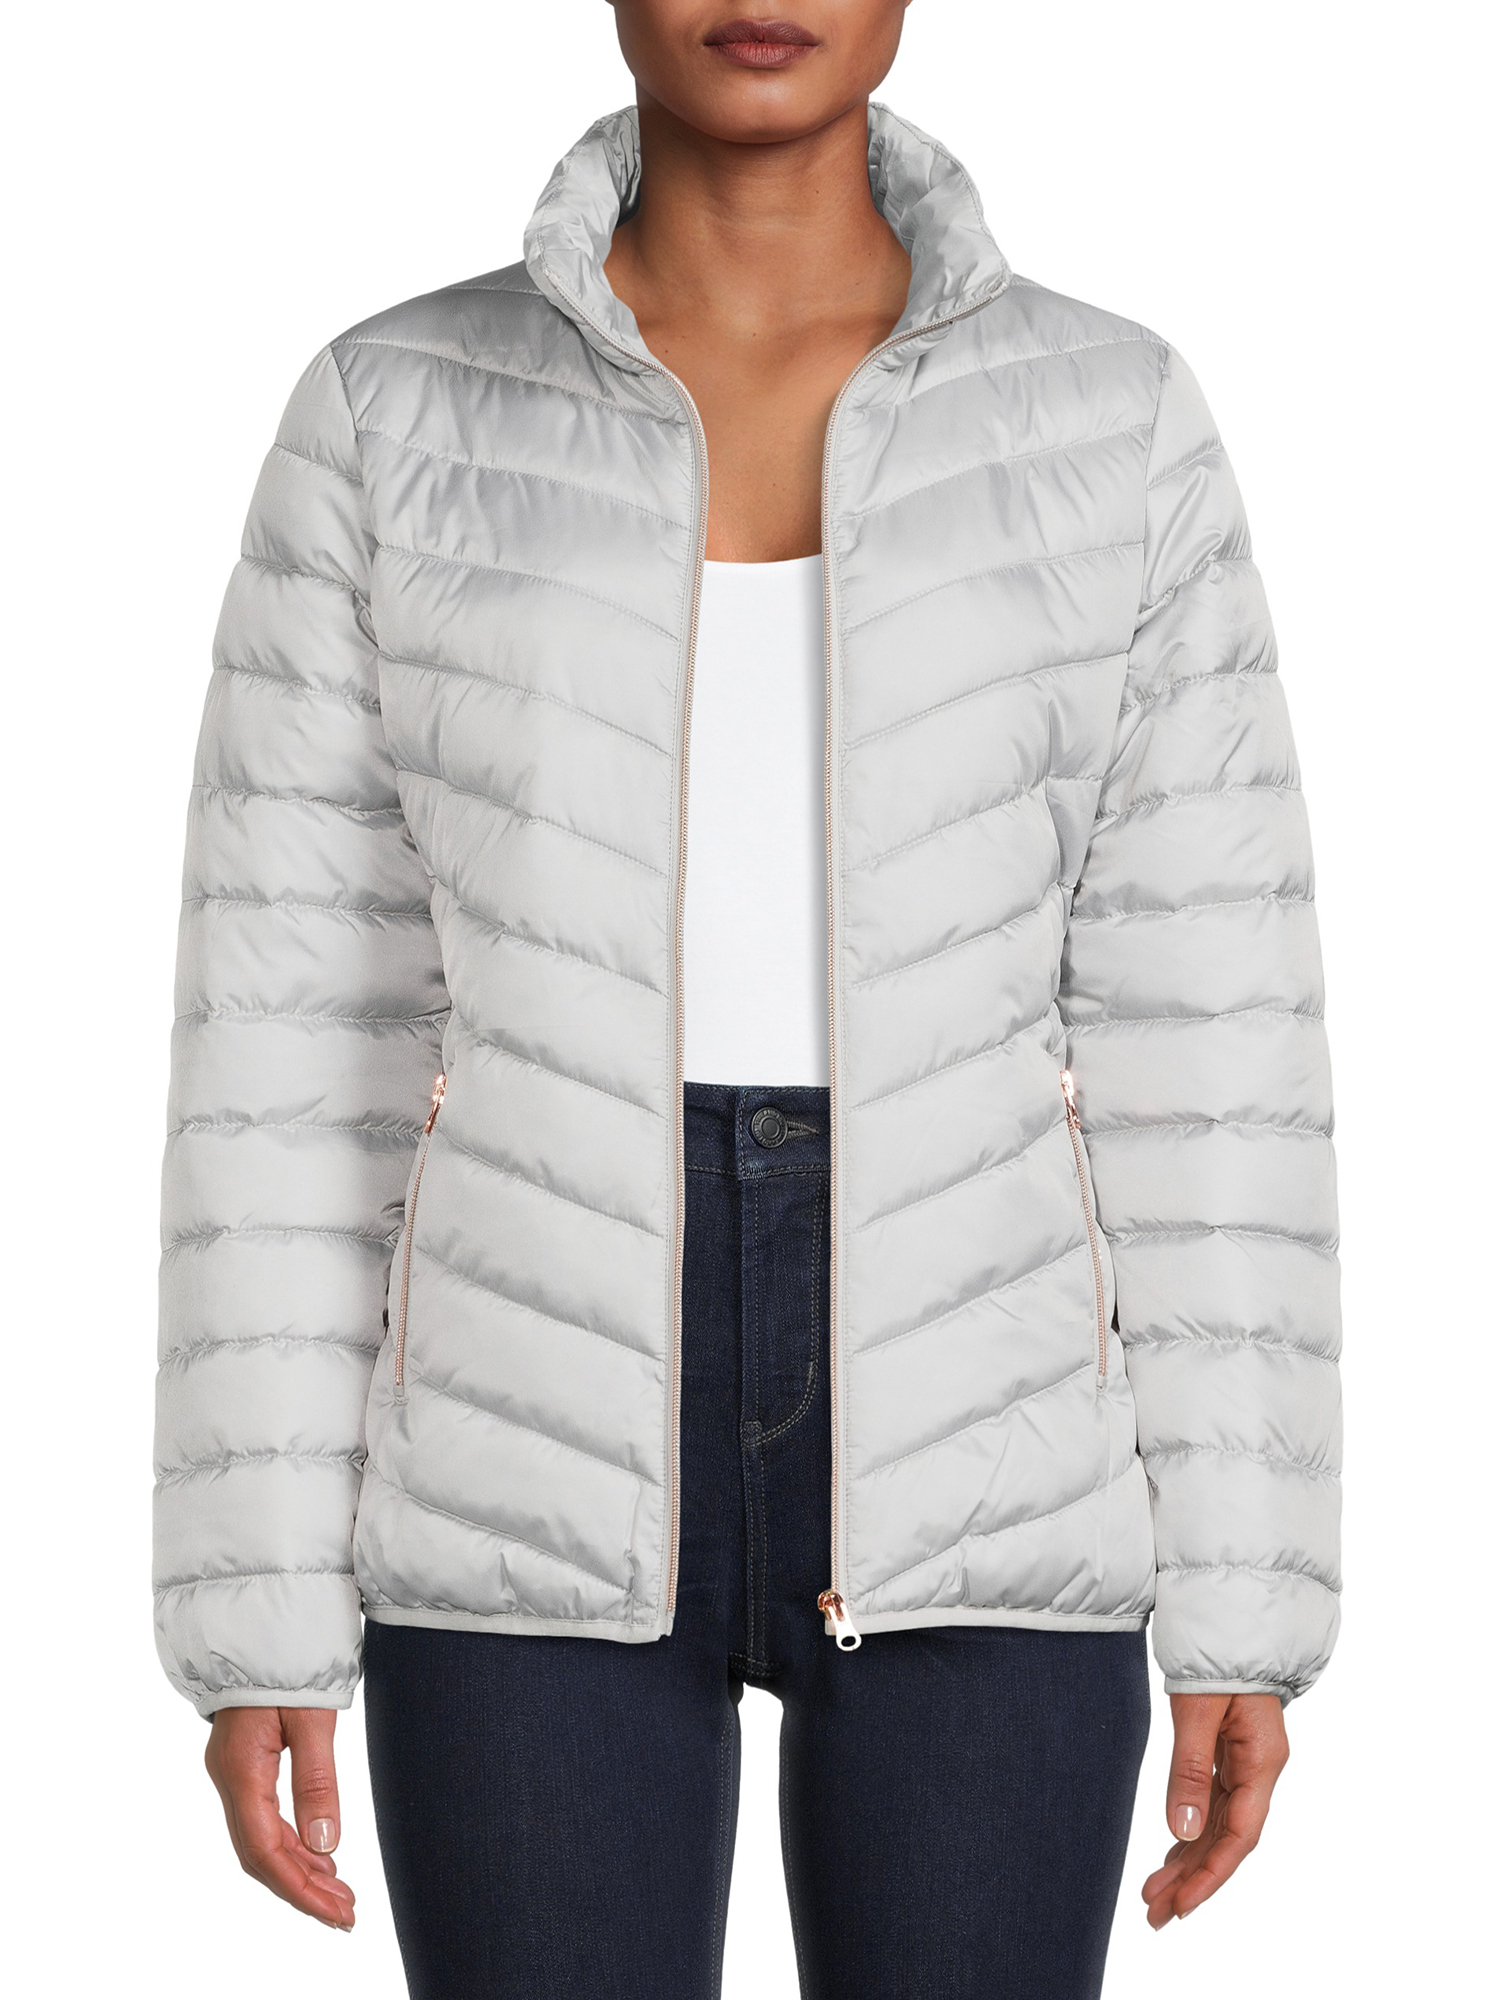 Big Chill Women's Packable Puffer Jacket, Sizes S-XL - image 1 of 5